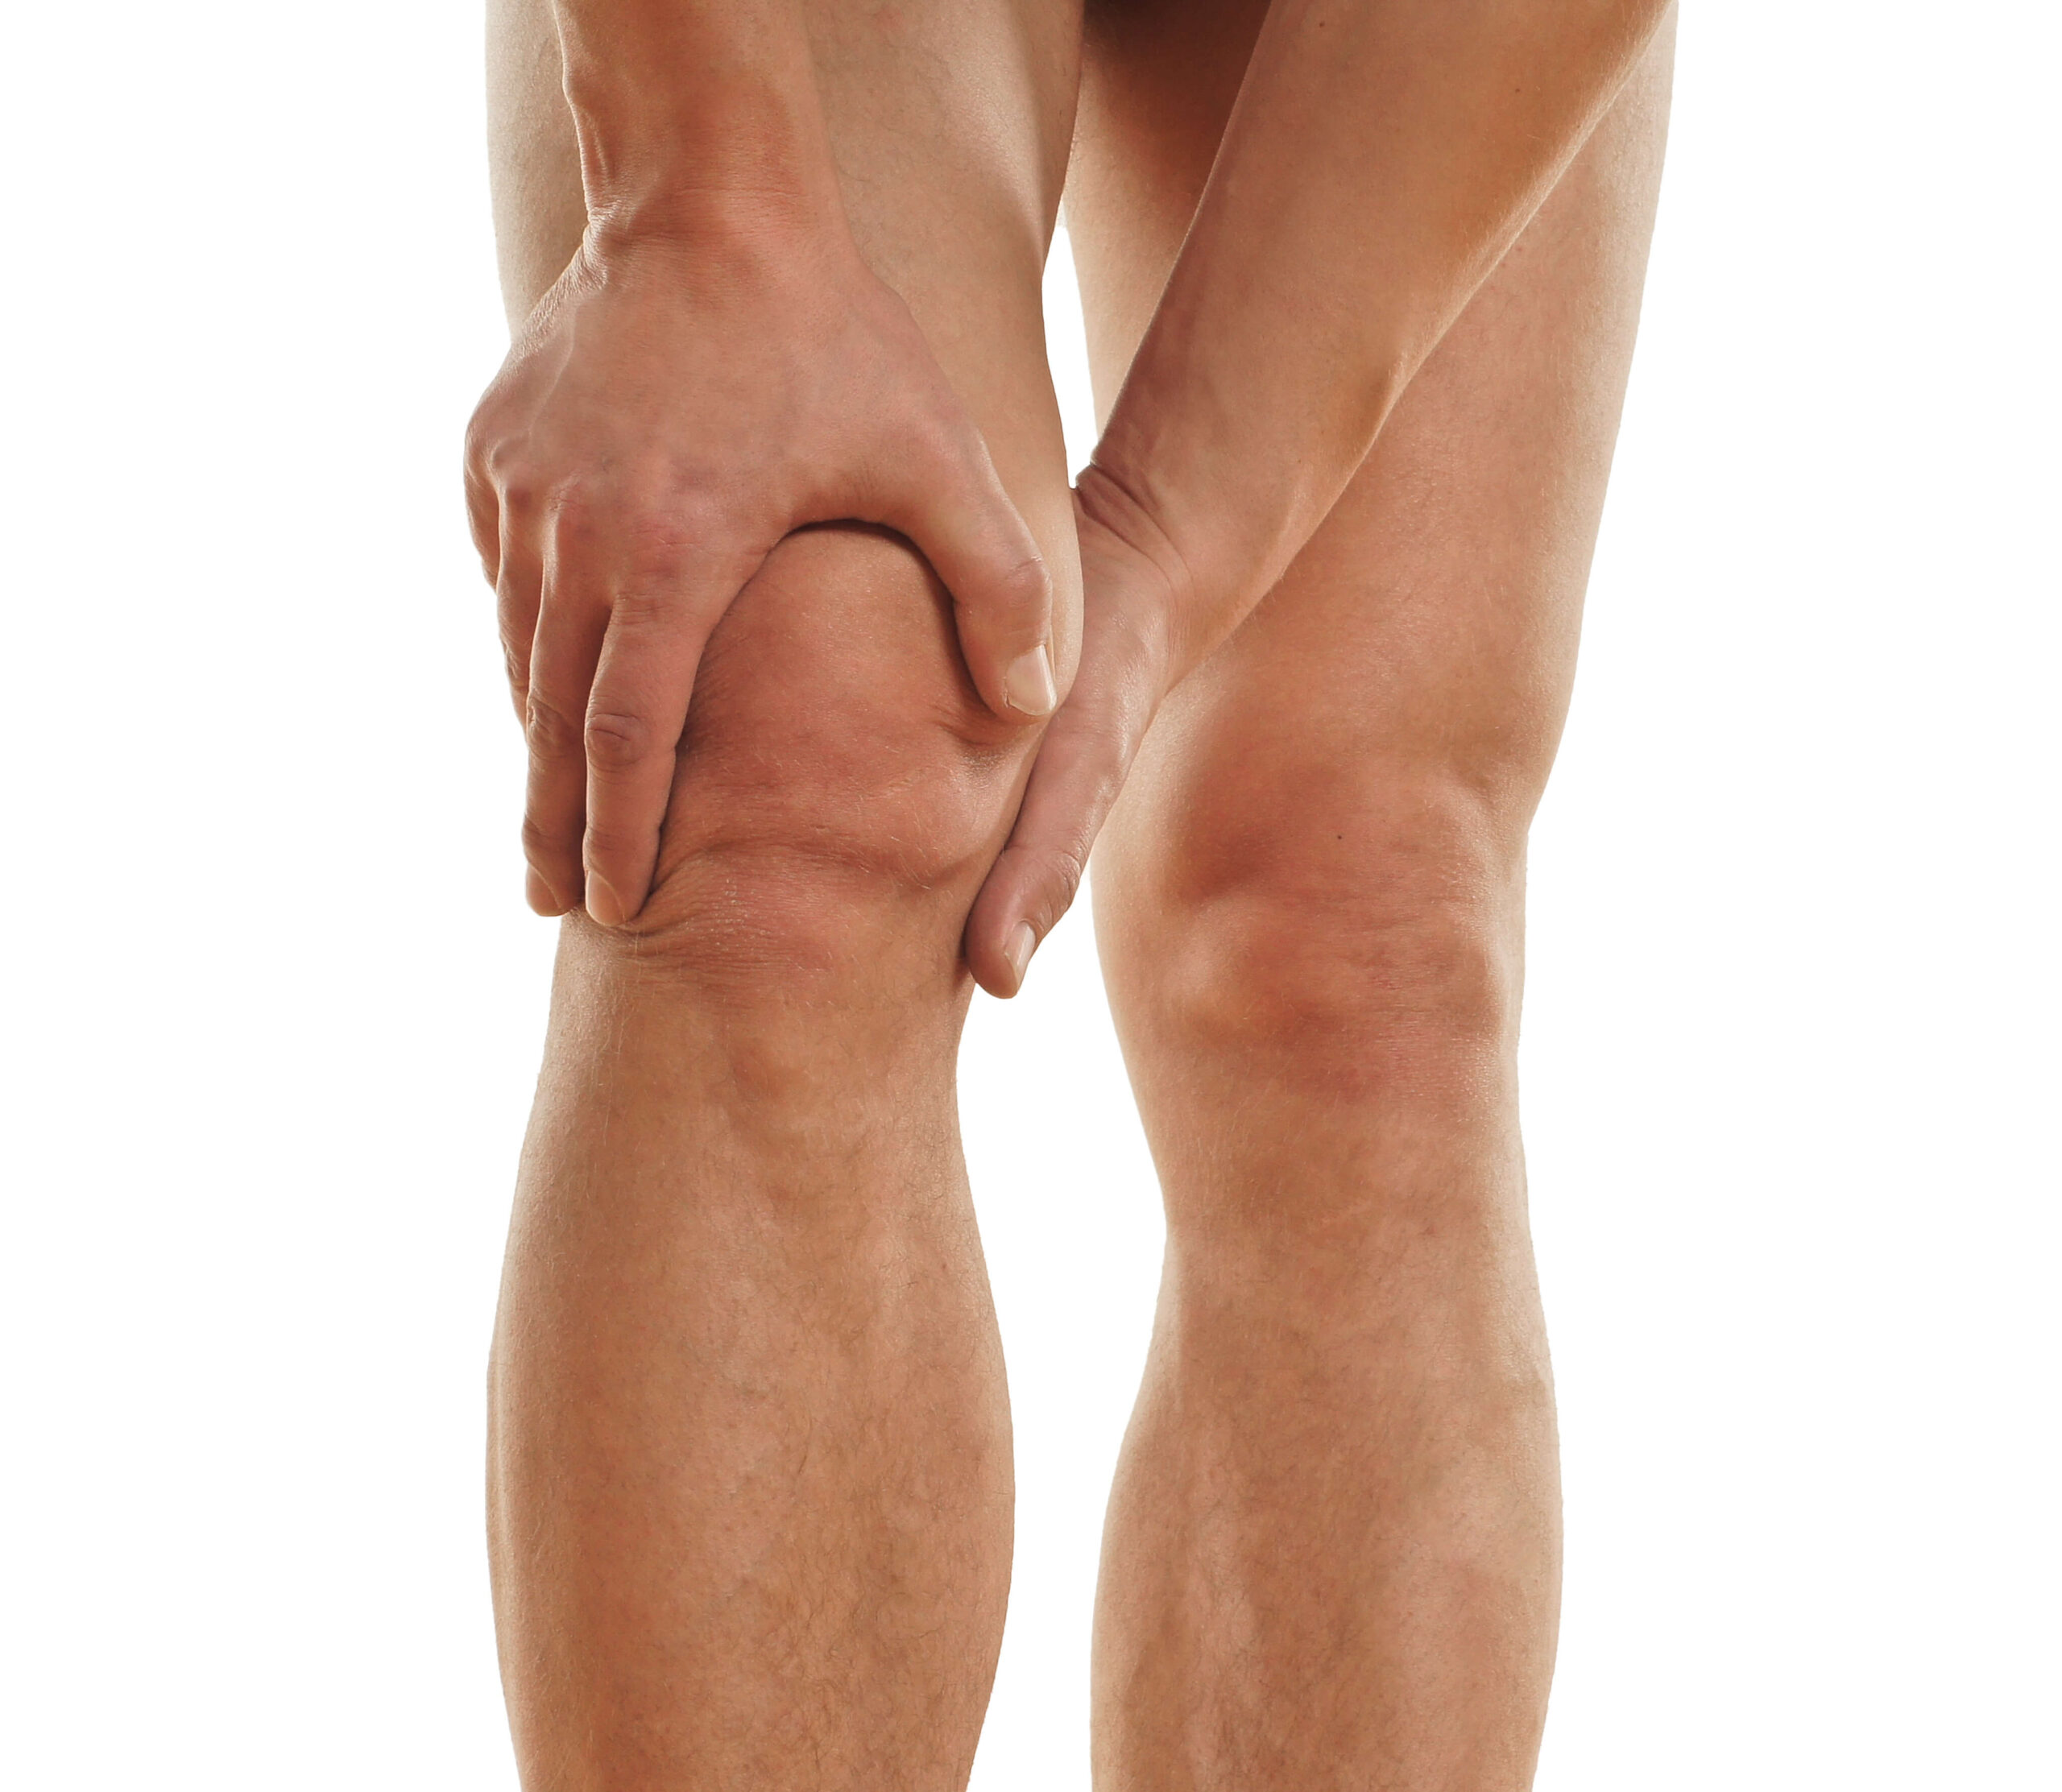 How to Quickly Relieve Knee Pain